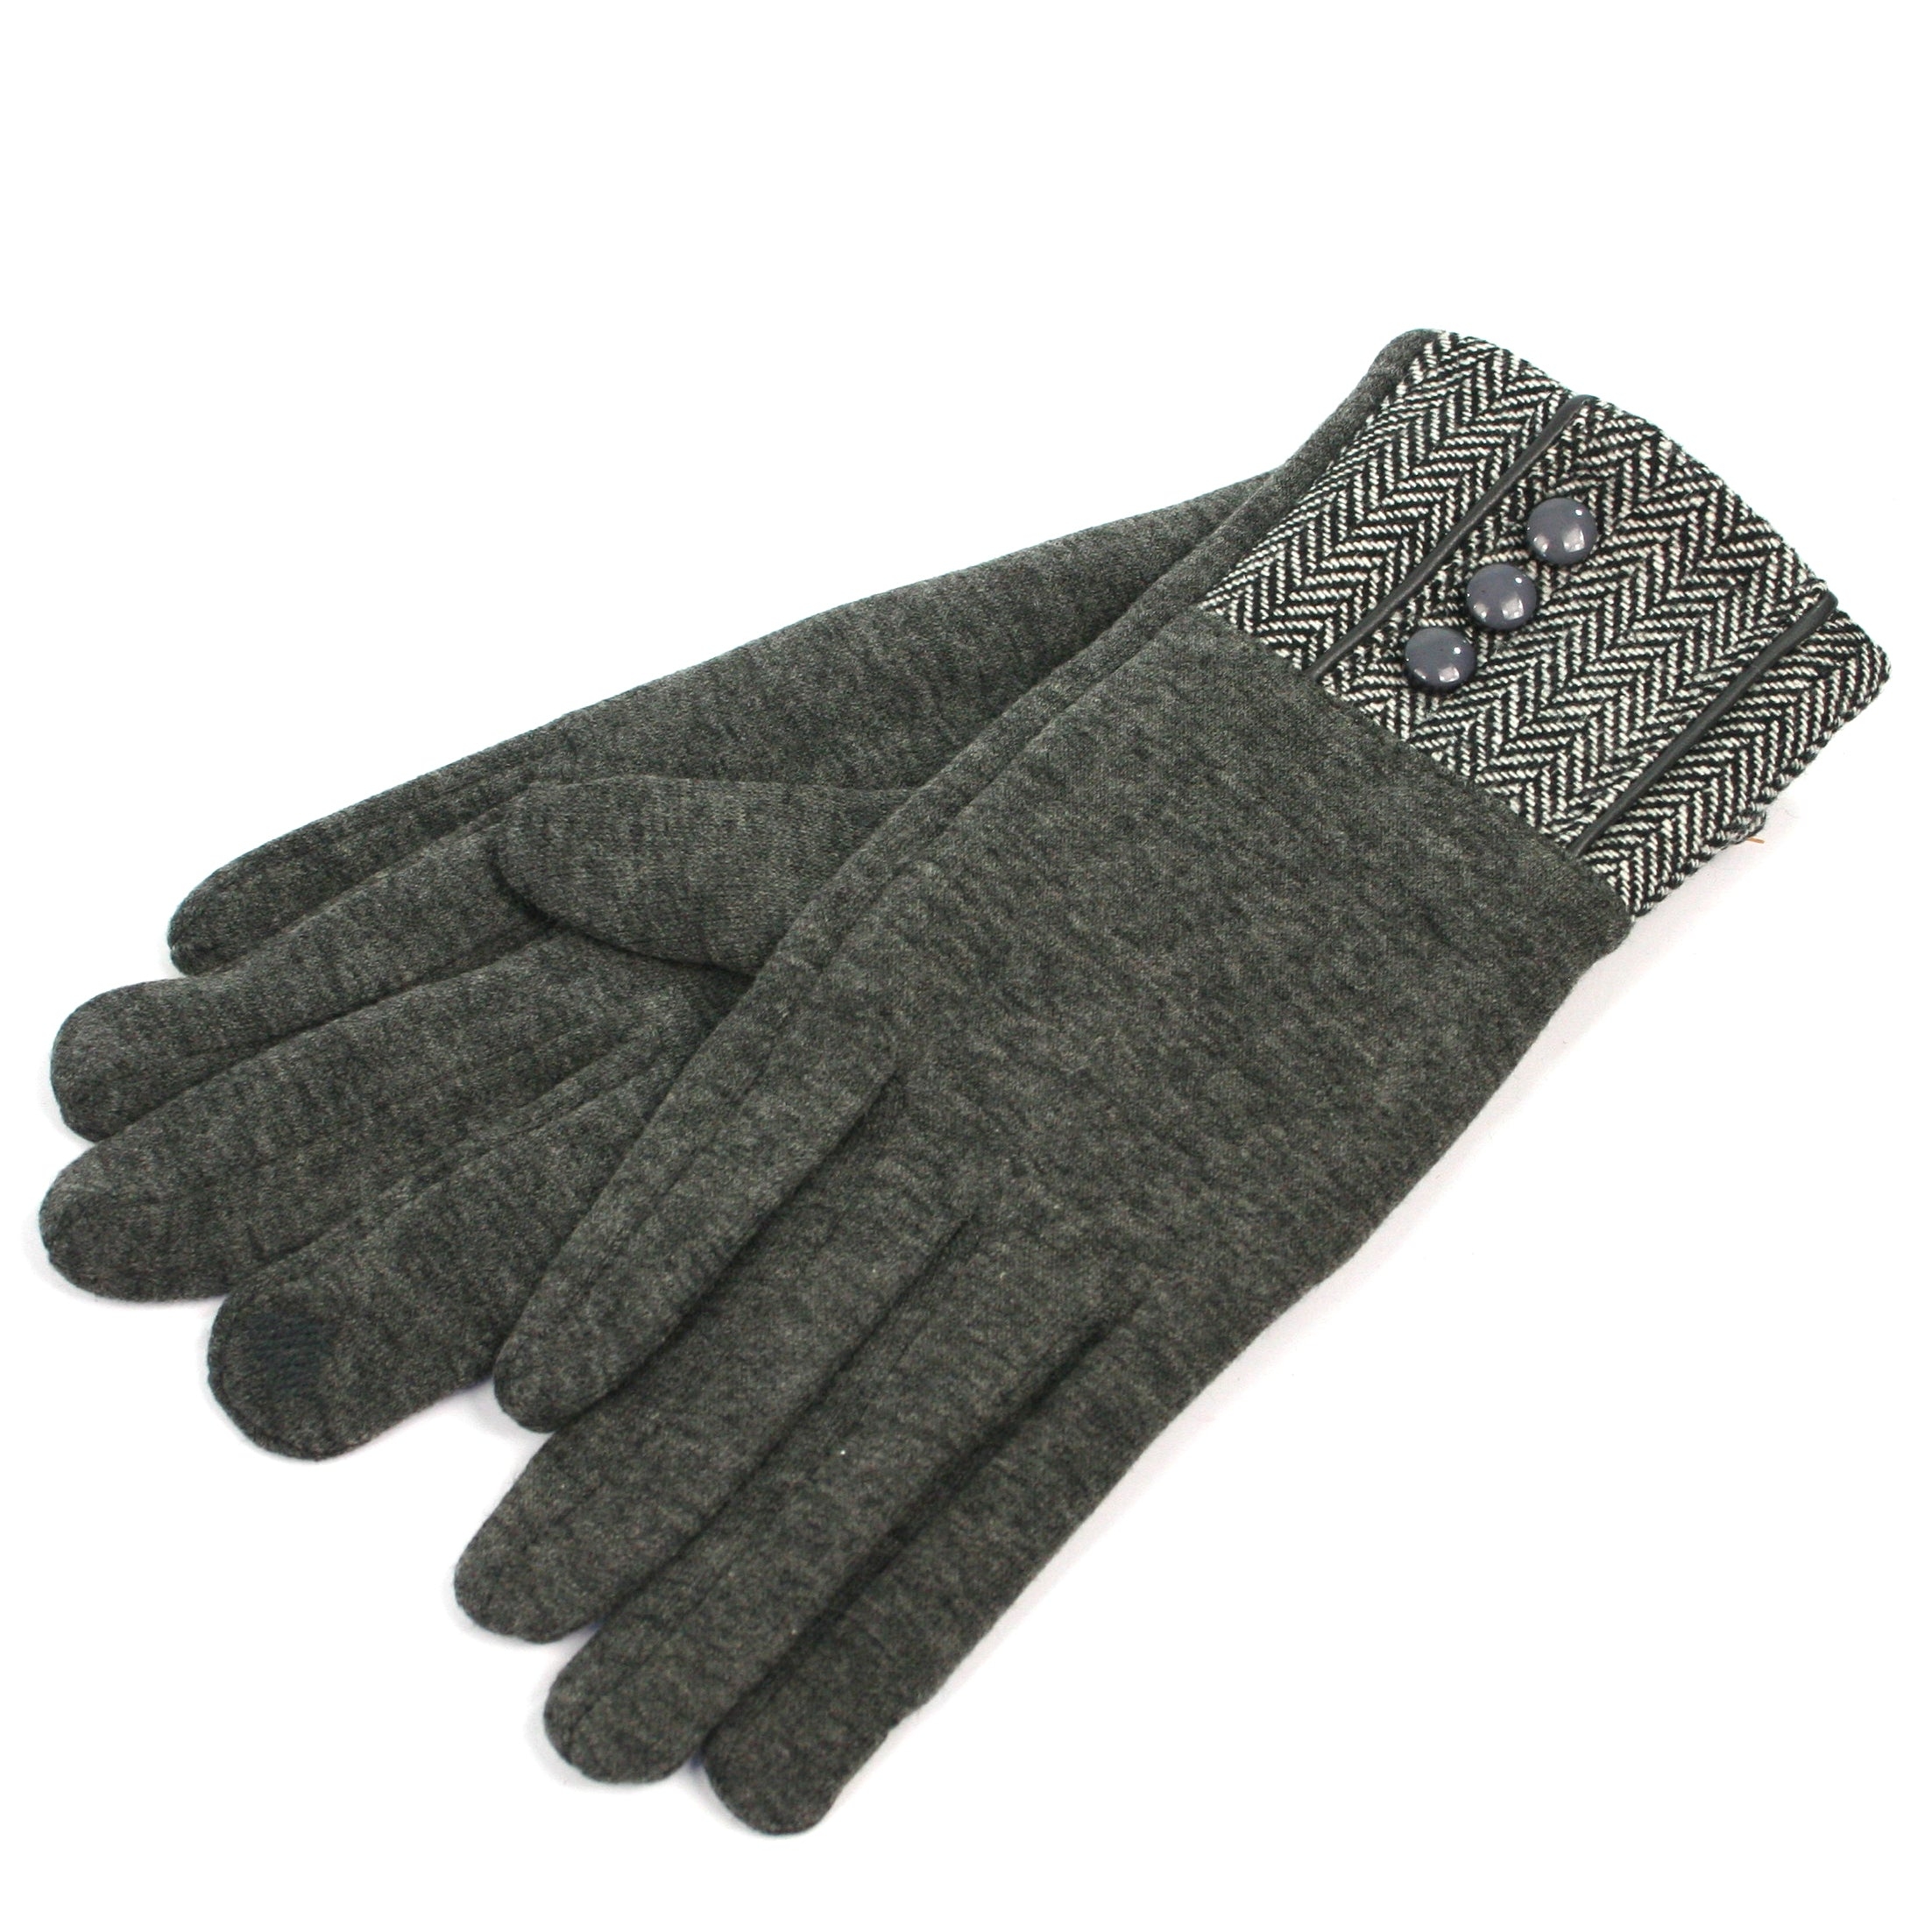 Soft Ladies Gloves with Herringbone and Button Detailing Grey – The Scarf Giraffe